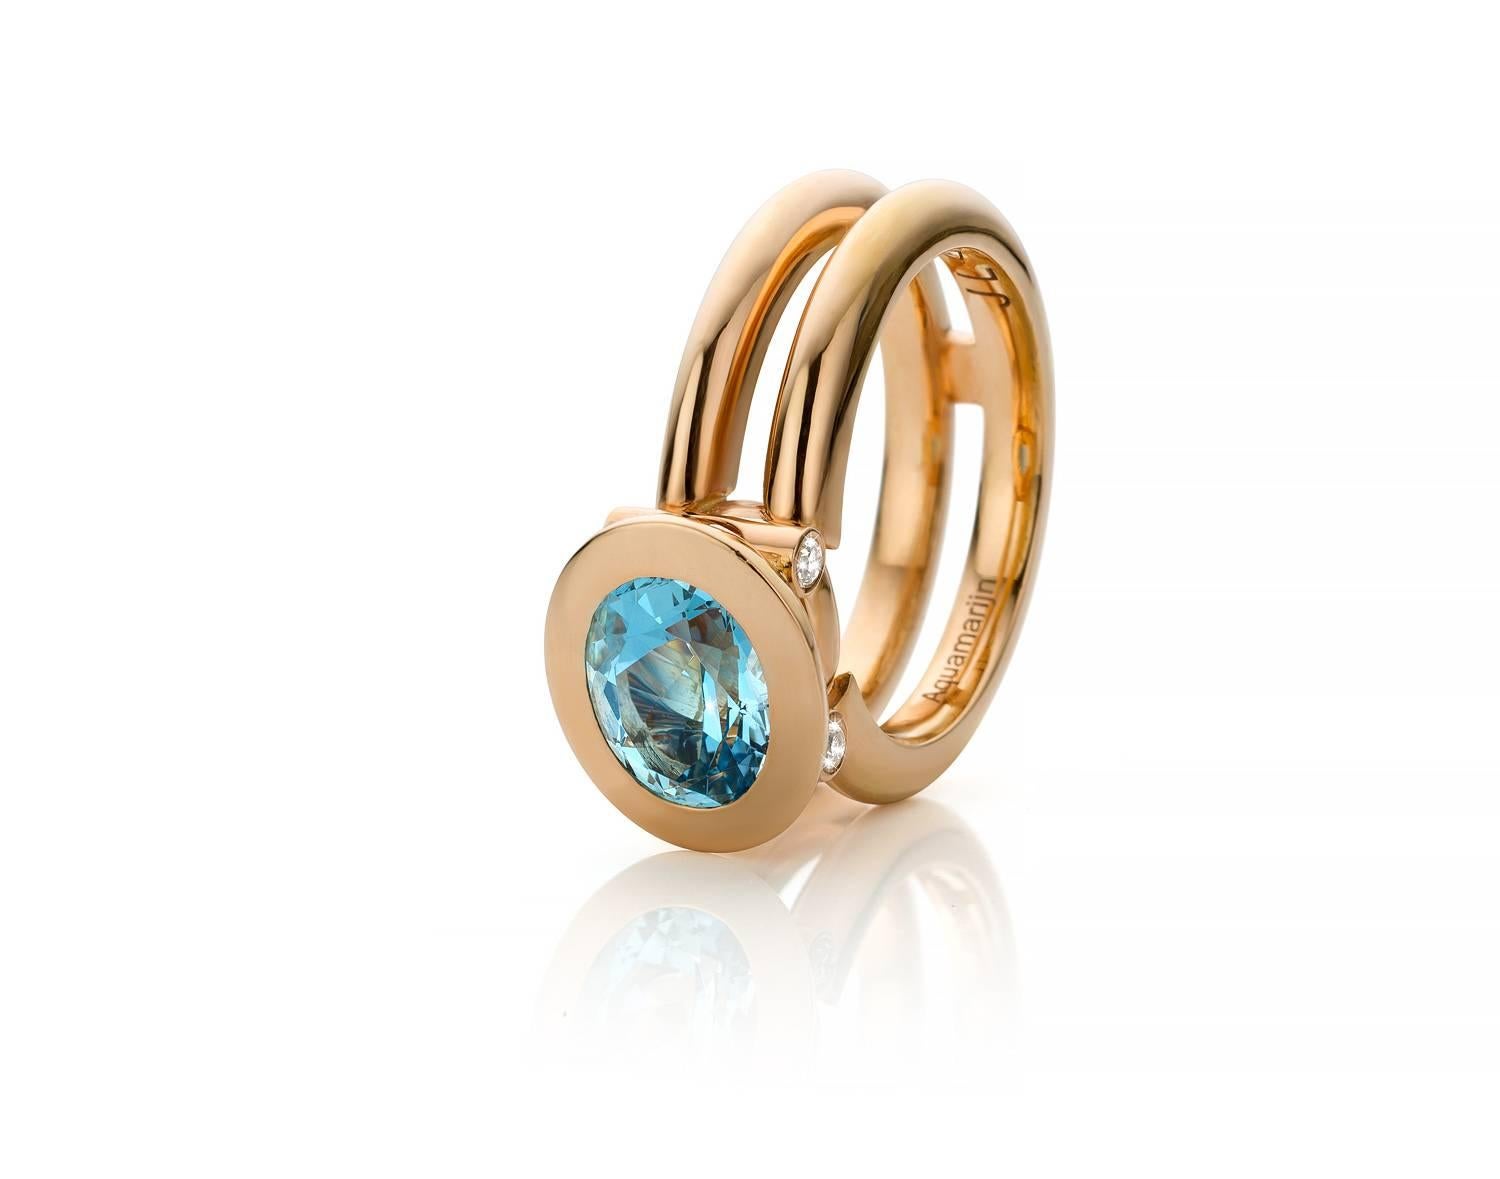 Diamonds :  Color G
                    Quality VS1
                    Weight 0,20 ct
Gemstone : Aquamarine 9 x 7 mm size

One of a kind rose gold ring, with a beautiful dark blue aquamarine. 

For the lover of quality. 